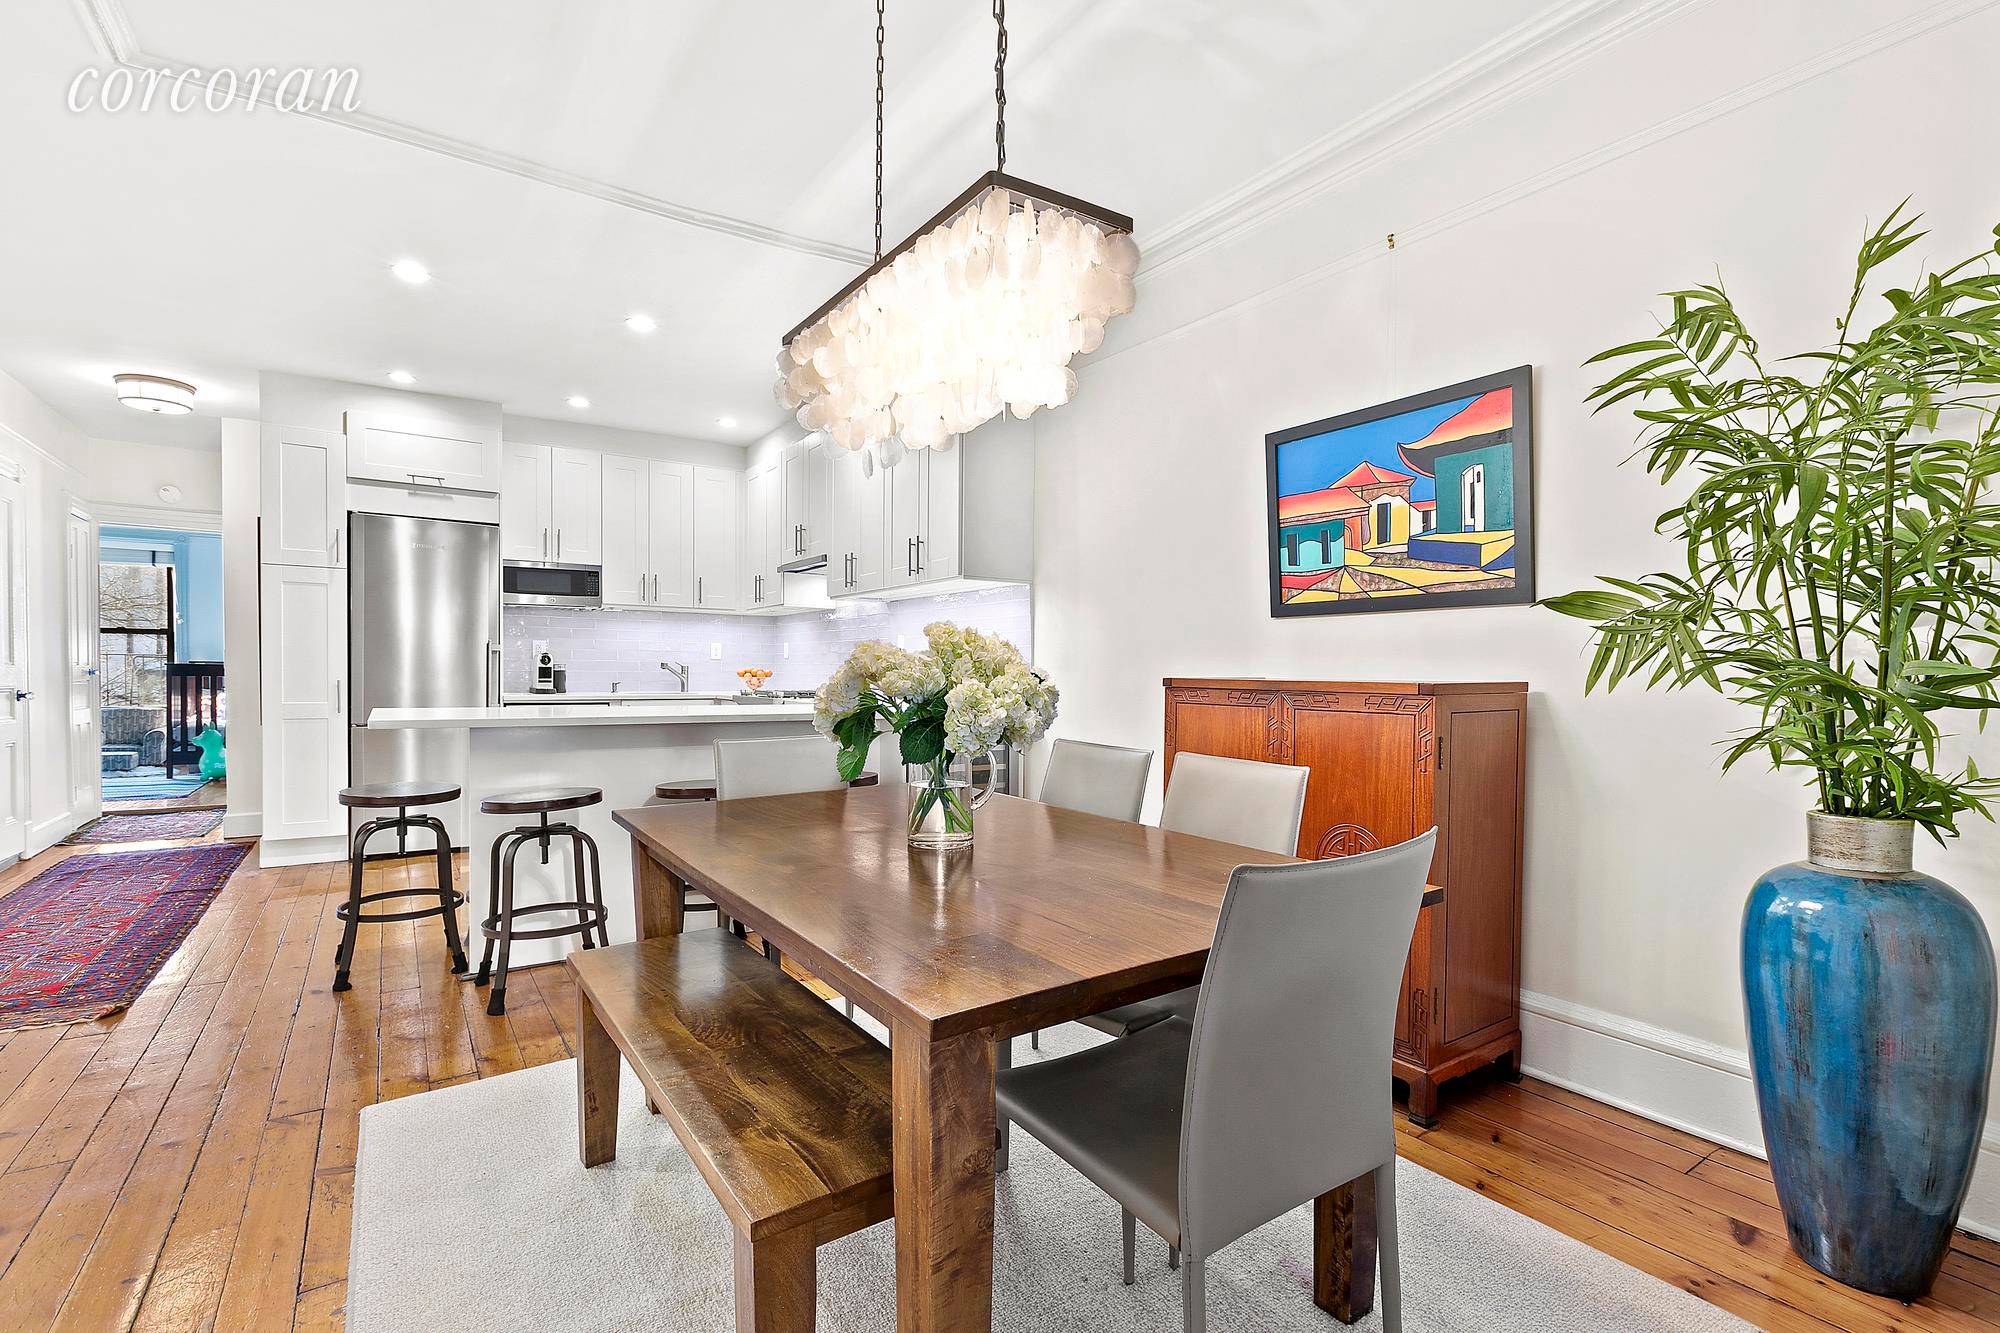 Large. Light. Luminous. This apartment spans the entire third floor of a four story brownstone.